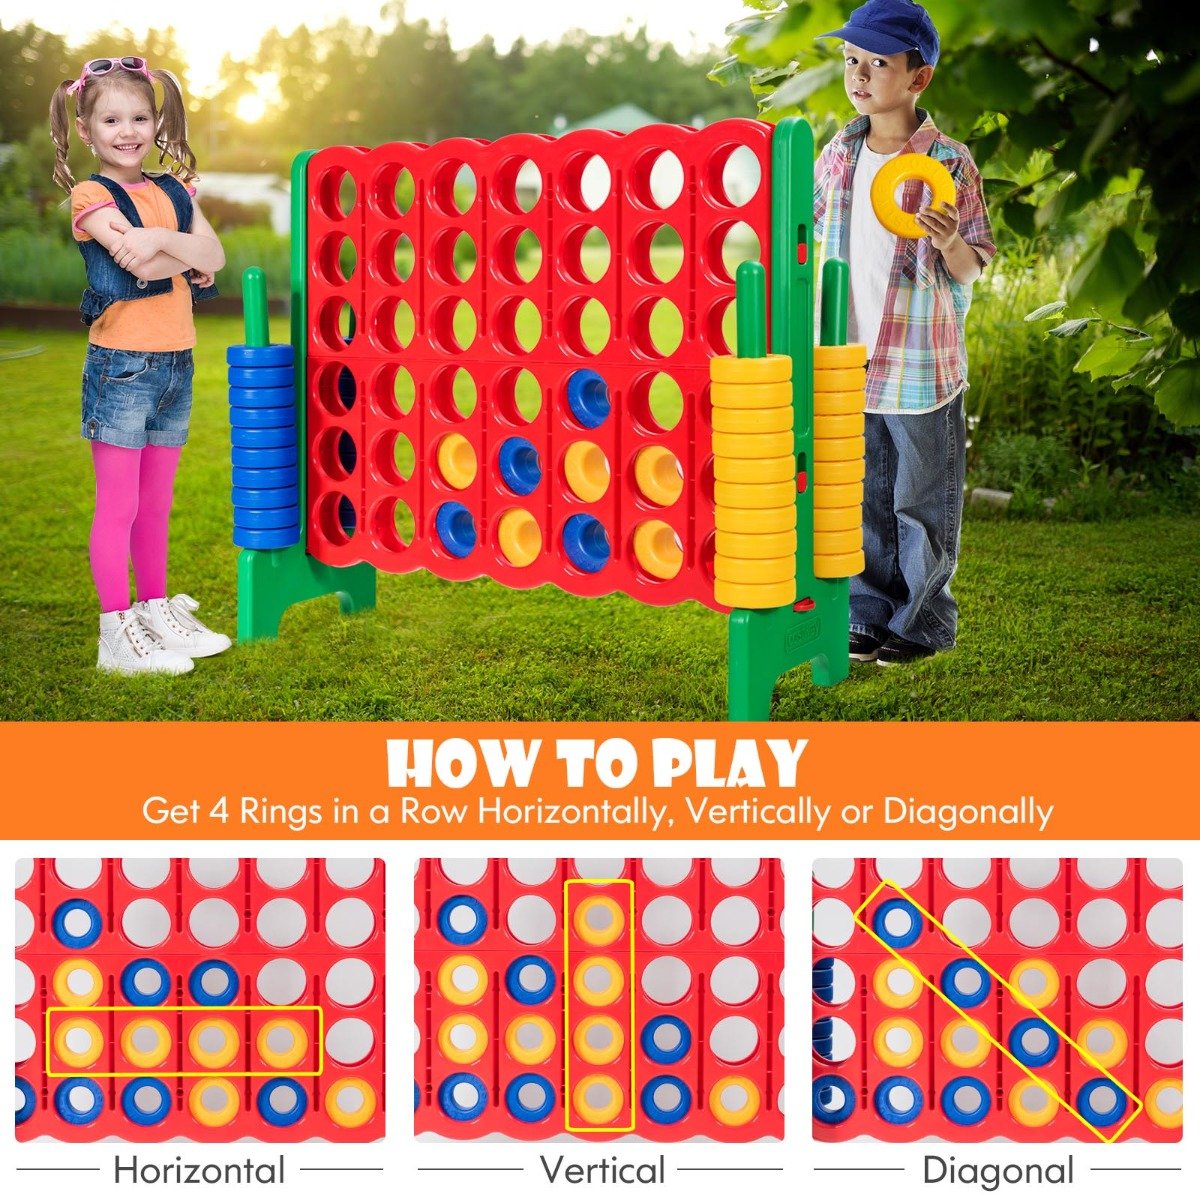 Giant Connect 4 in A Row - 42 Jumbo Rings for Lively Outdoor Gaming